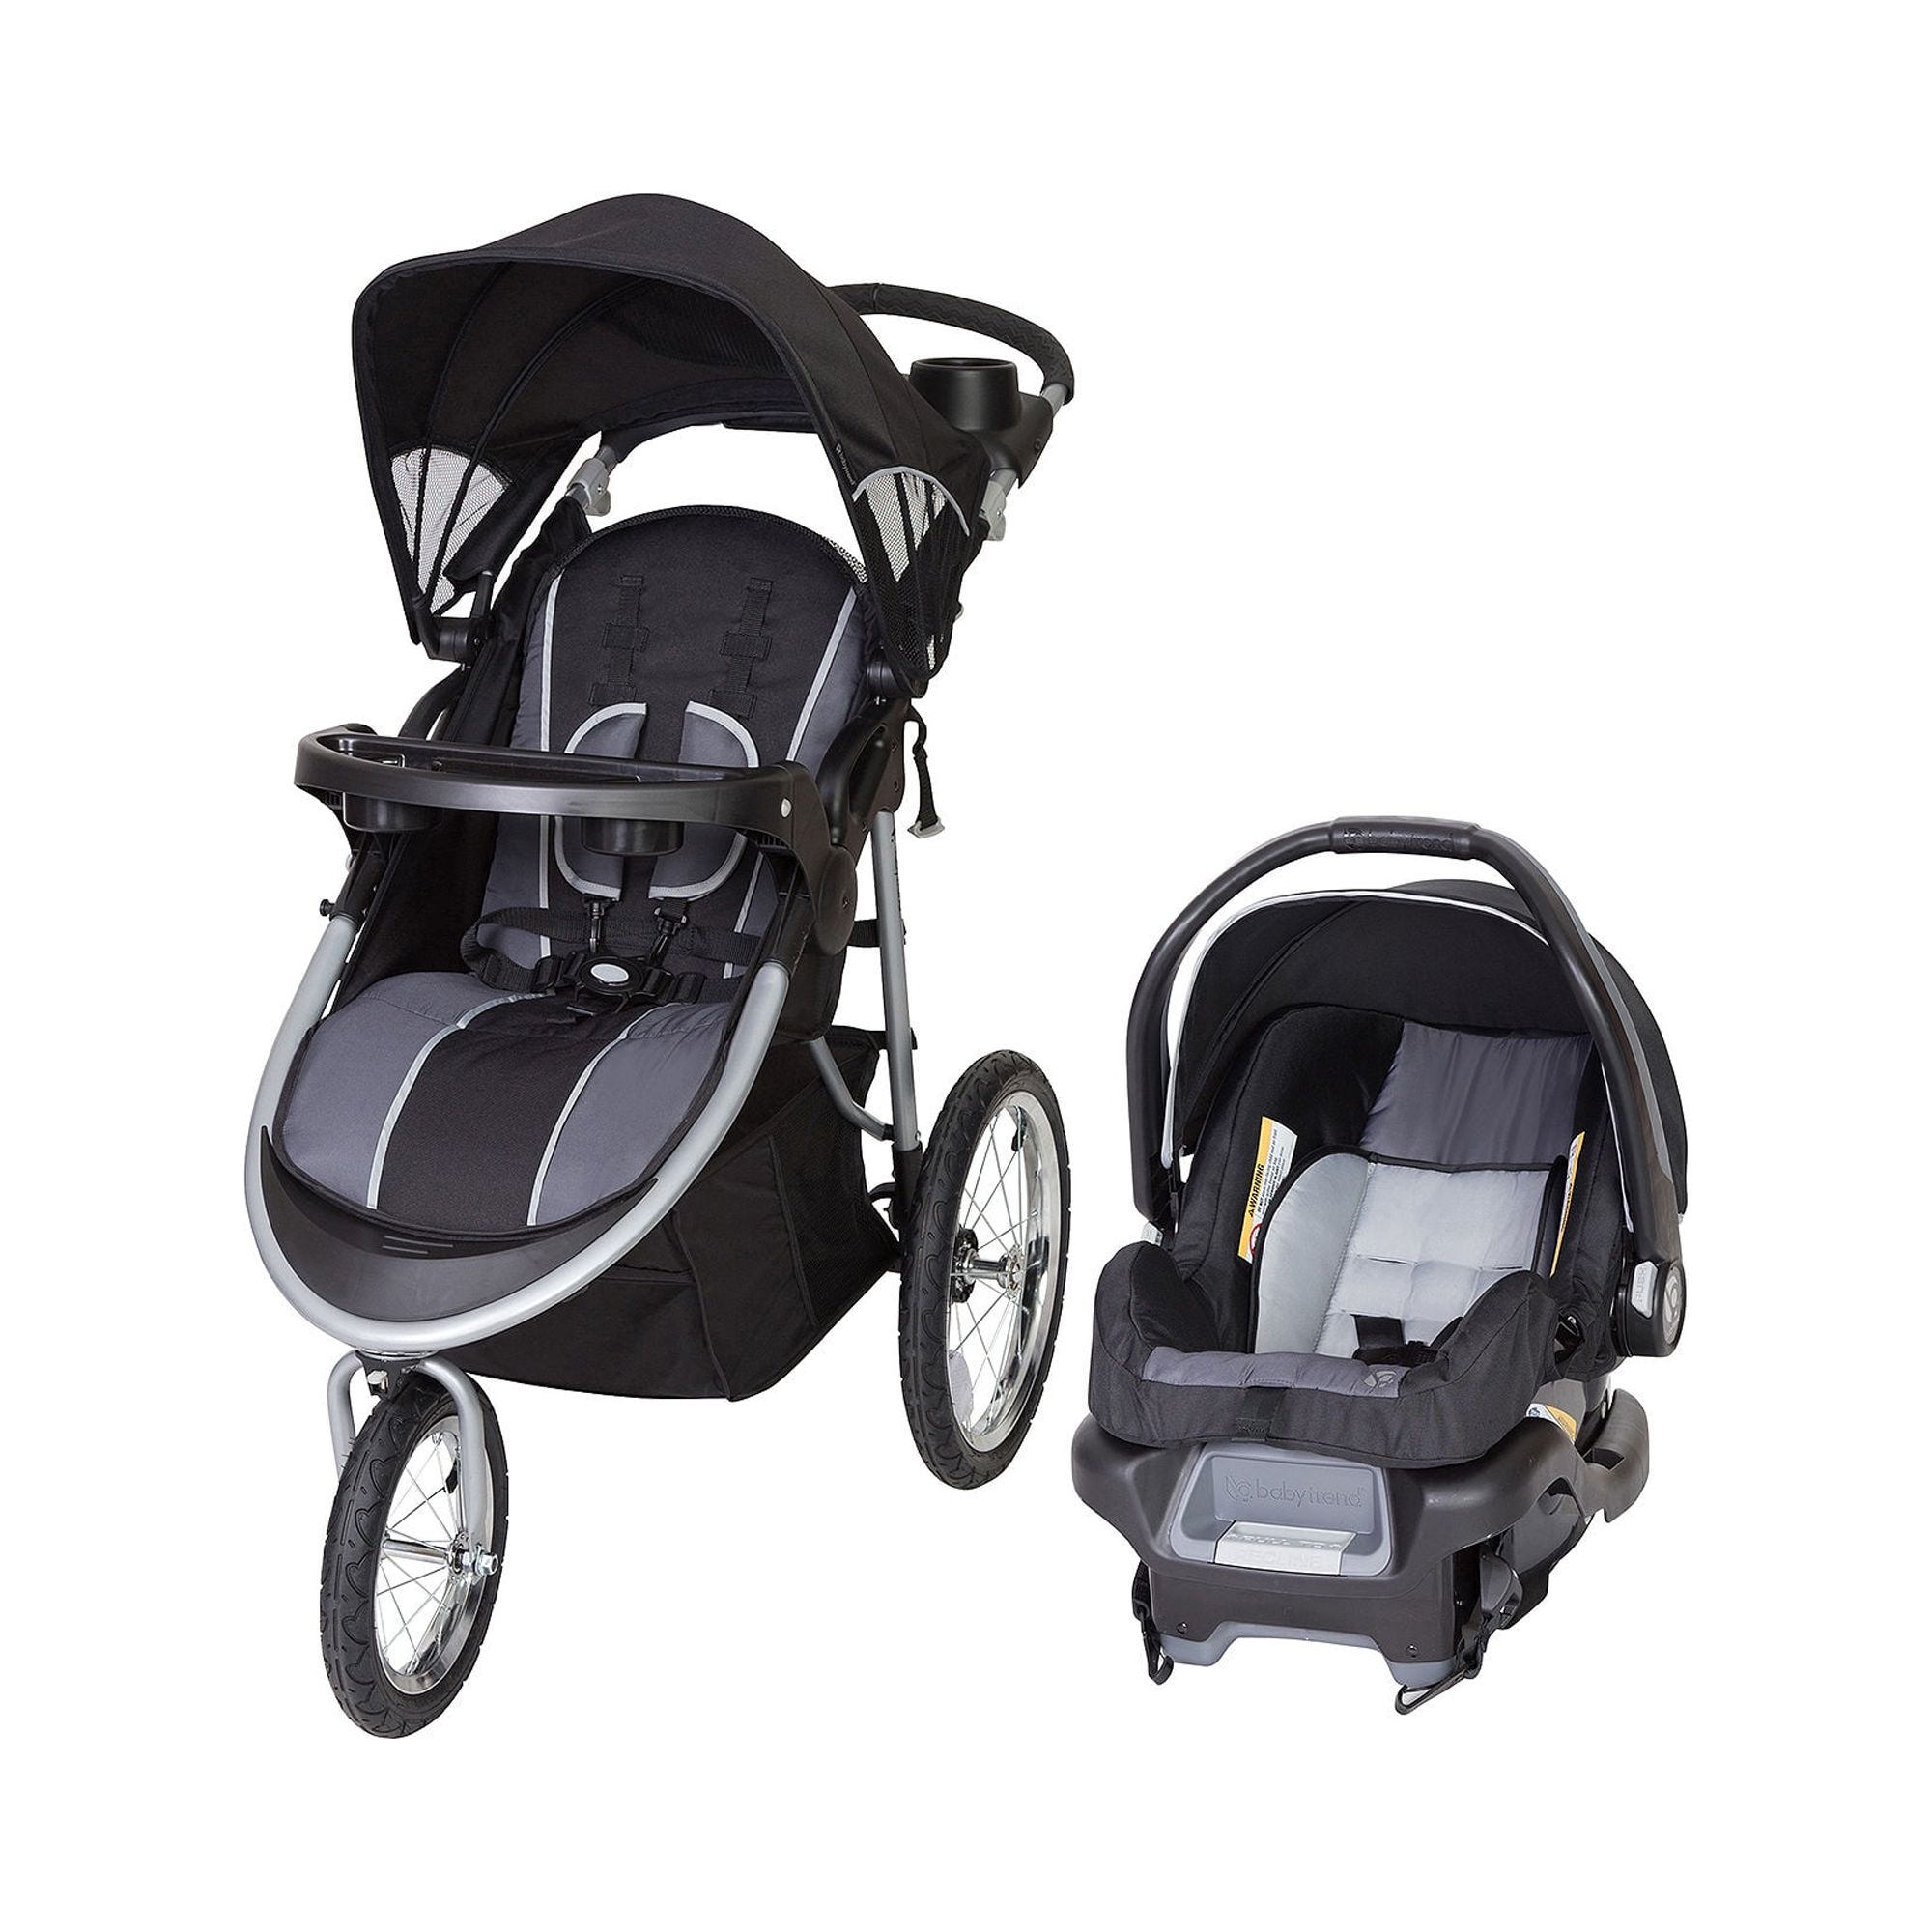 Baby Trend Pathway 35 Jogger Travel System, Optic Grey - image 3 of 4